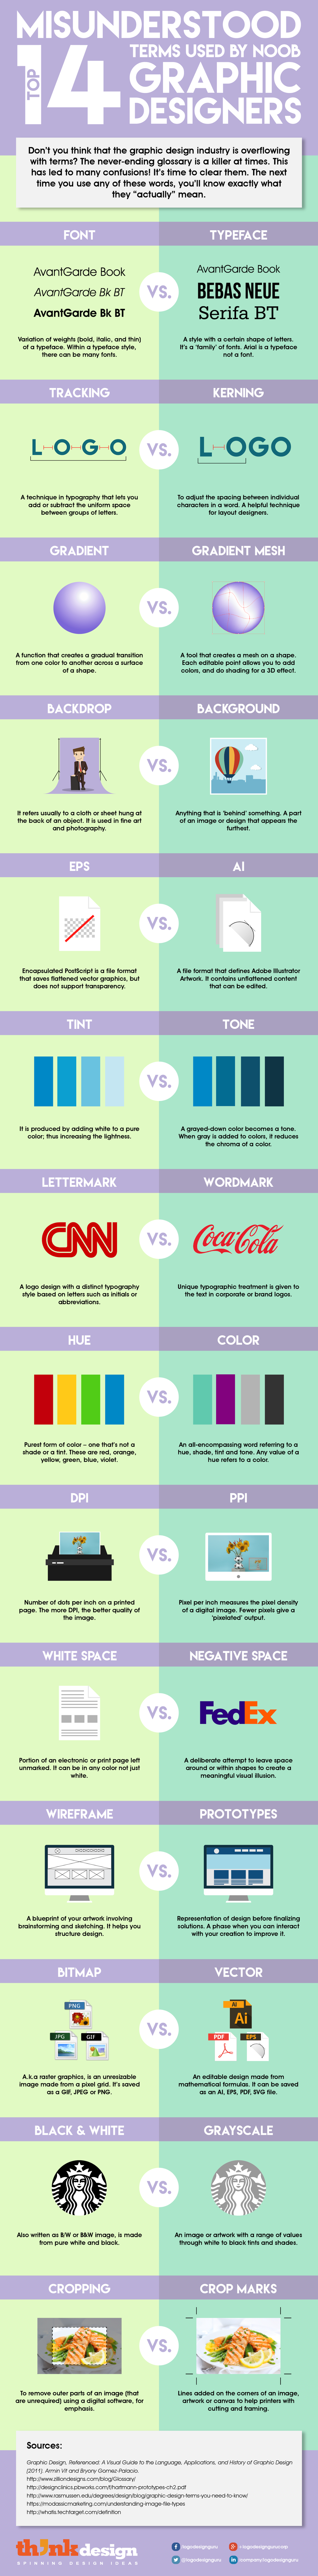 Top 14 Misunderstood Terms Used by Noob Graphic Designers - #infographic